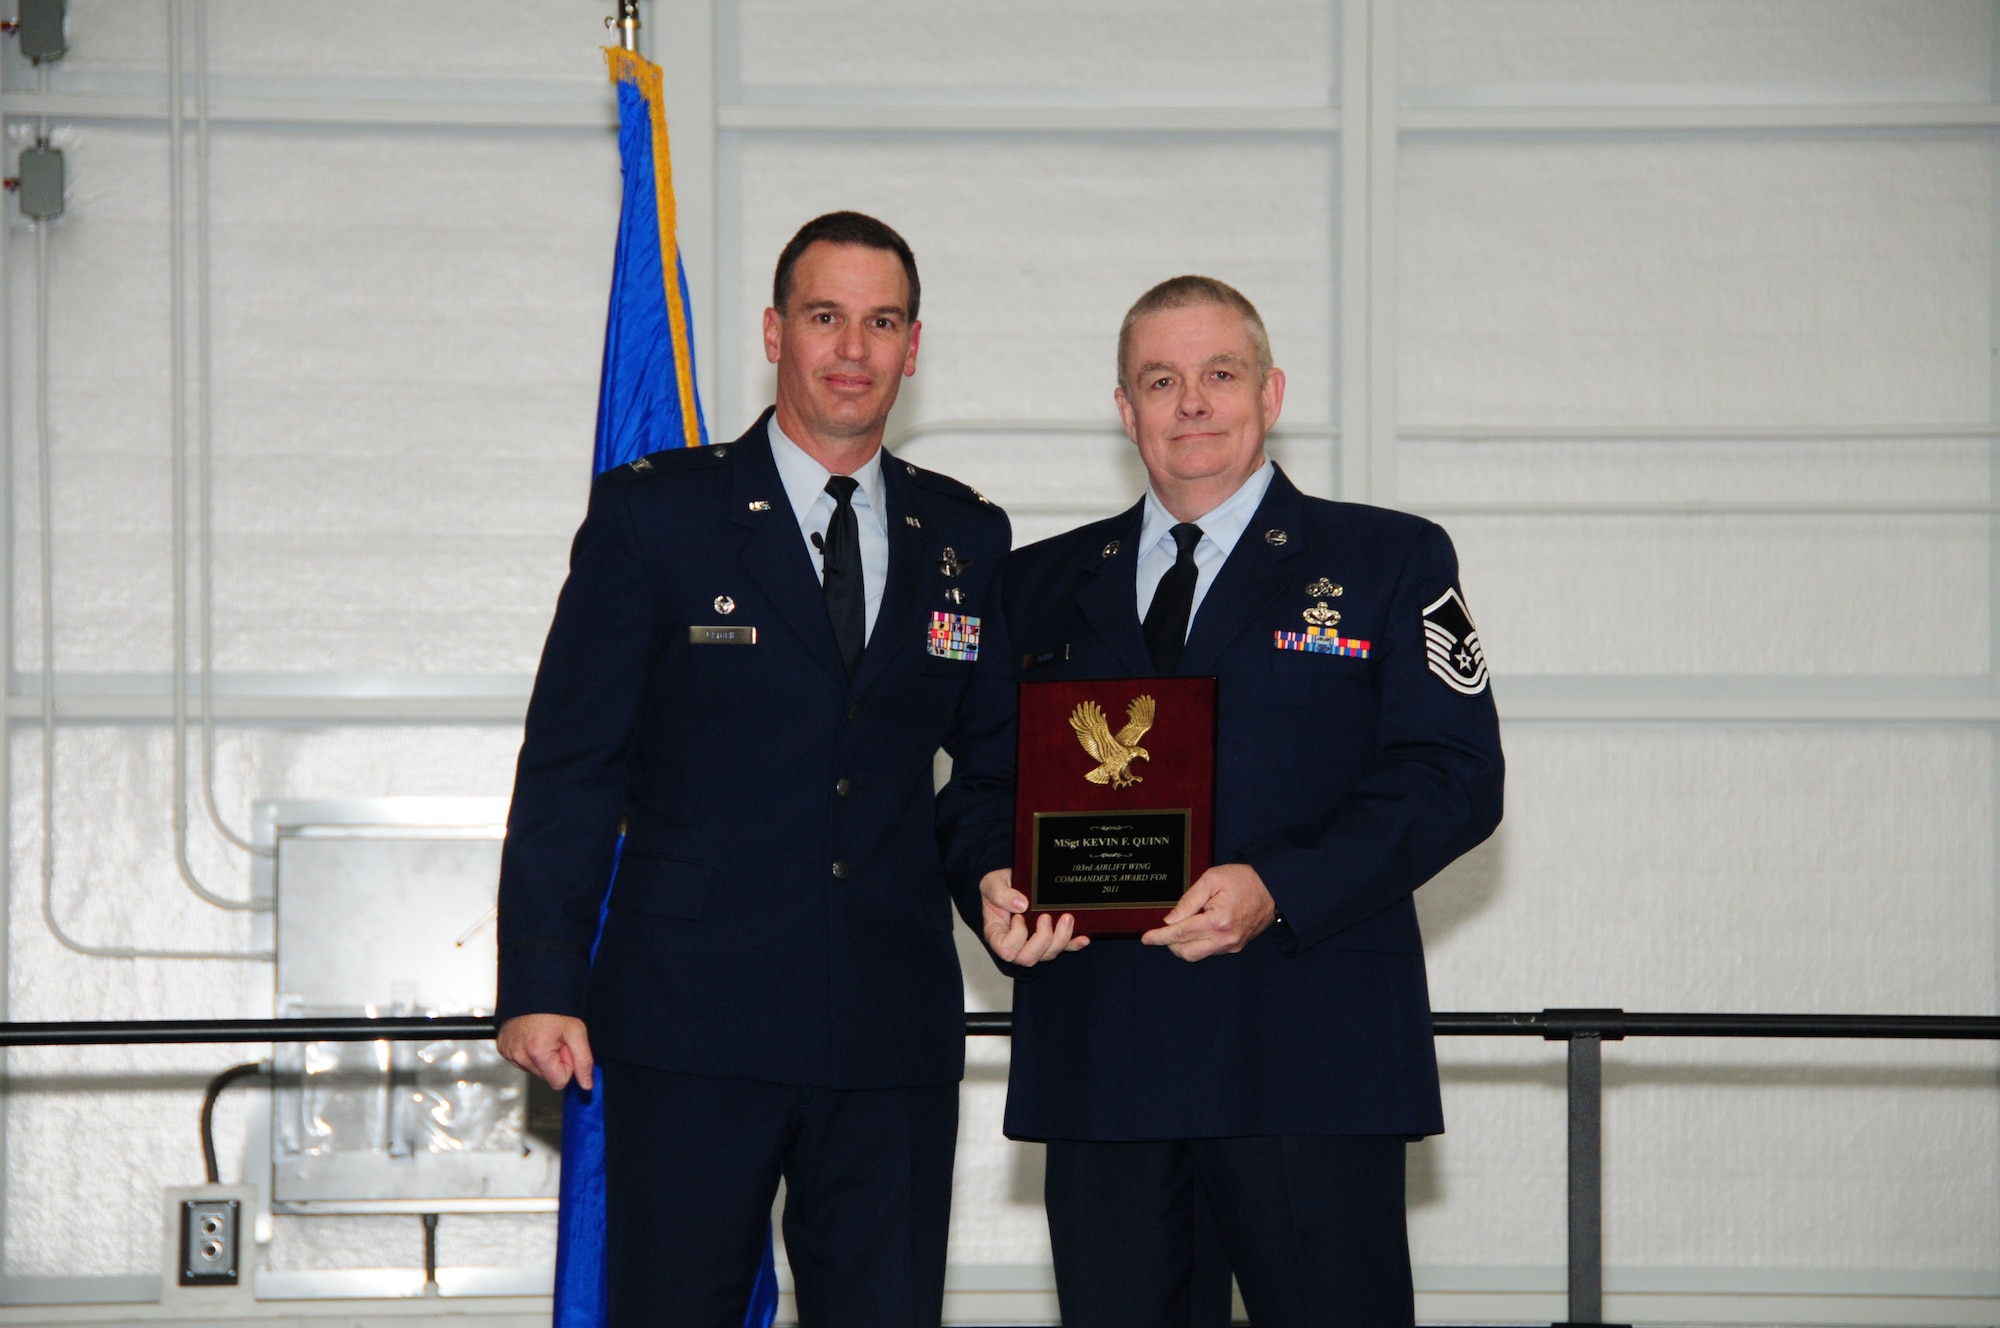 Col. Frank Detorie, 103rd Airlift Wing commander, stands with Master Sgt. Kevin Quinn of the 103rd Civil Engineer Squadron after presenting him with the coveted Commander’s Award during the annual awards ceremony April 14, 2012, in the main hangar at Bradley Air National Guard Base, East Granby, Conn. (U.S. Air Force photo by Senior Airman Emmanuel Santiago\RELEASED)